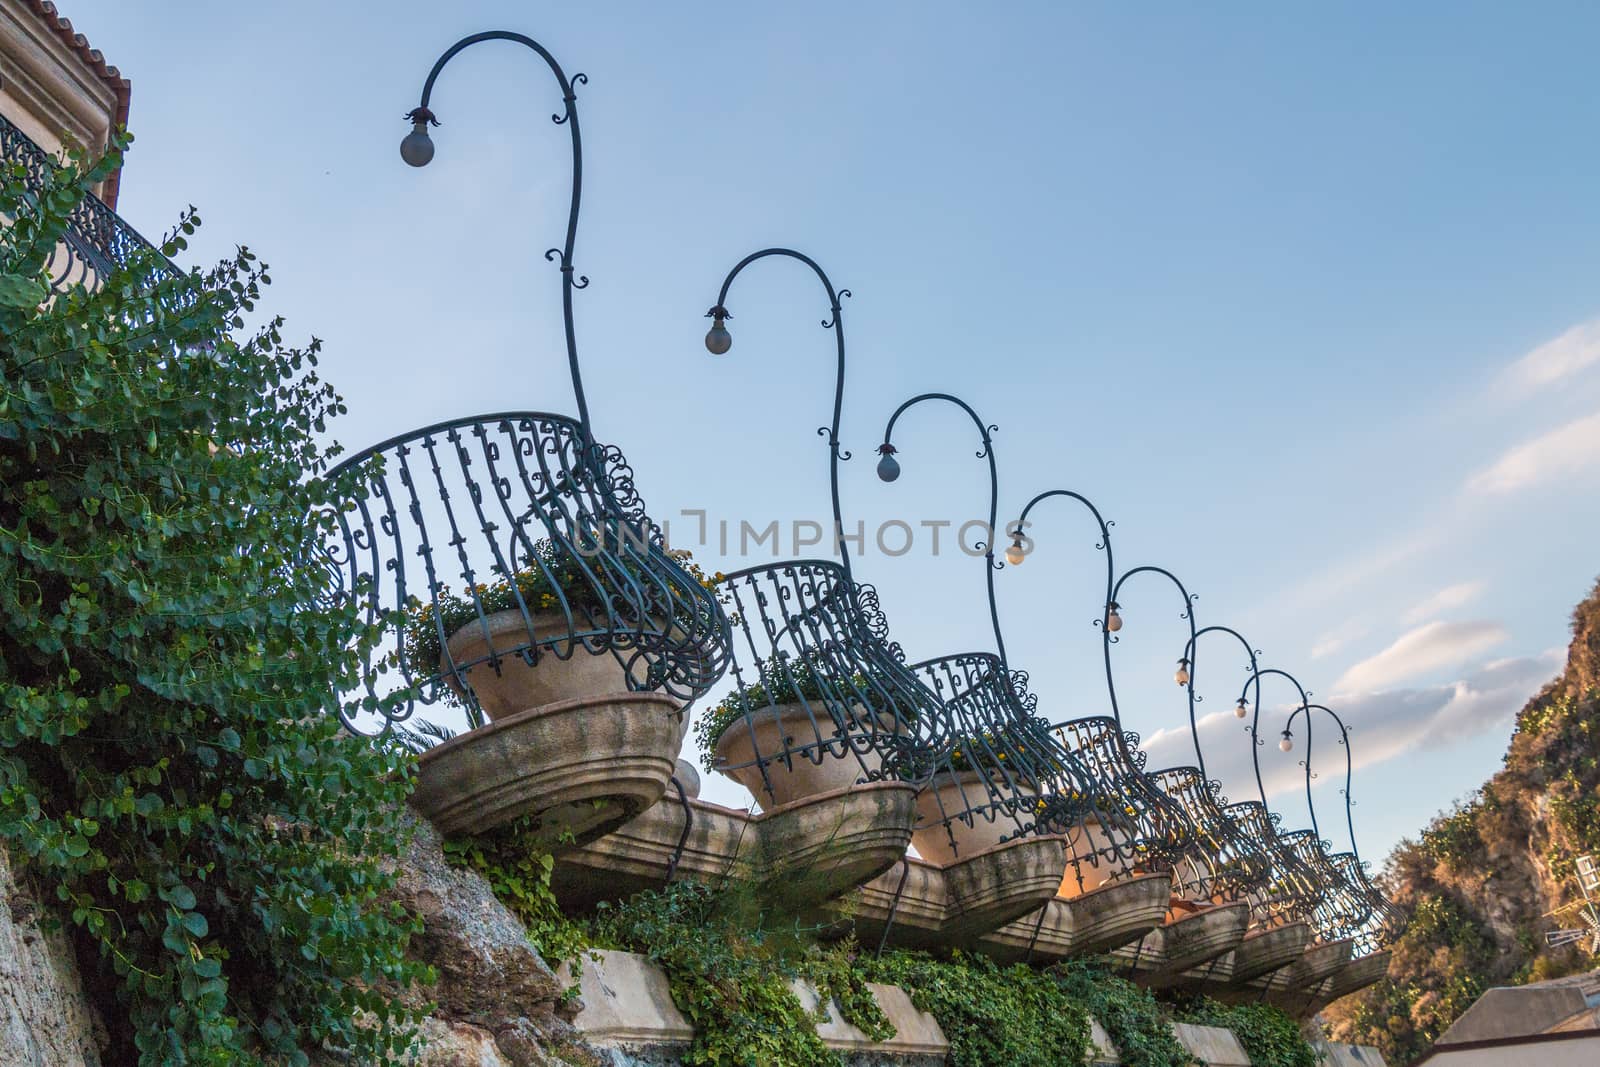 Very beautiful Balconies round with lamps a